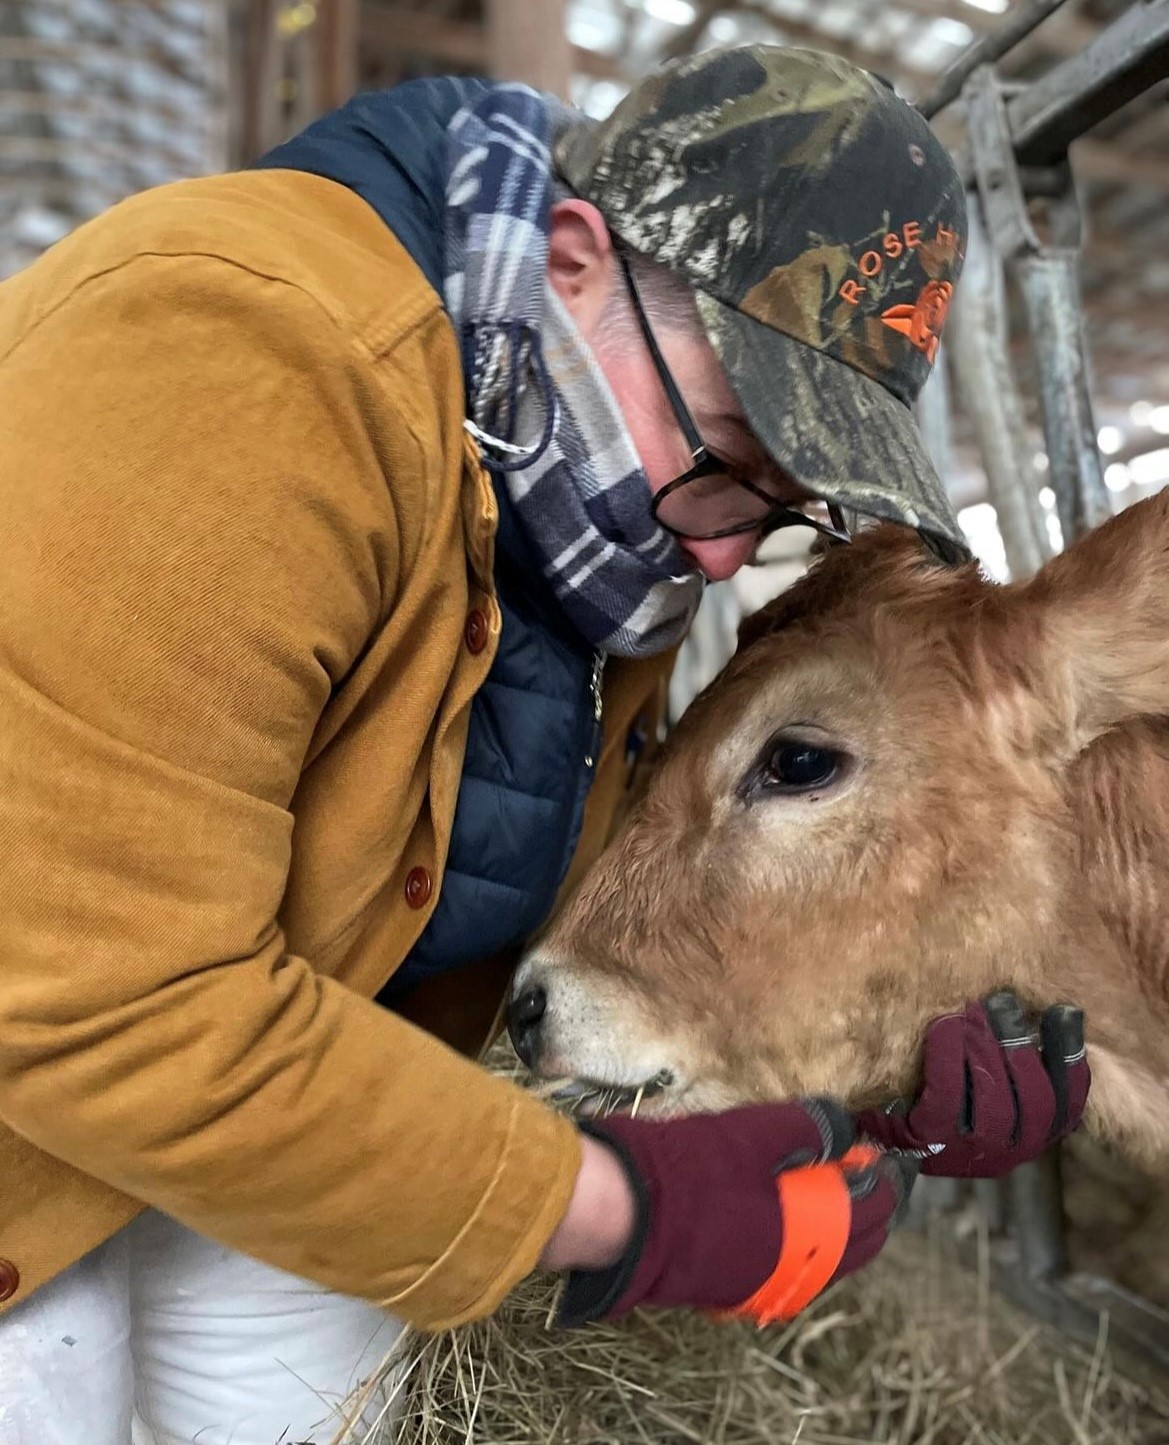 Stacy grooming a cow under the chin